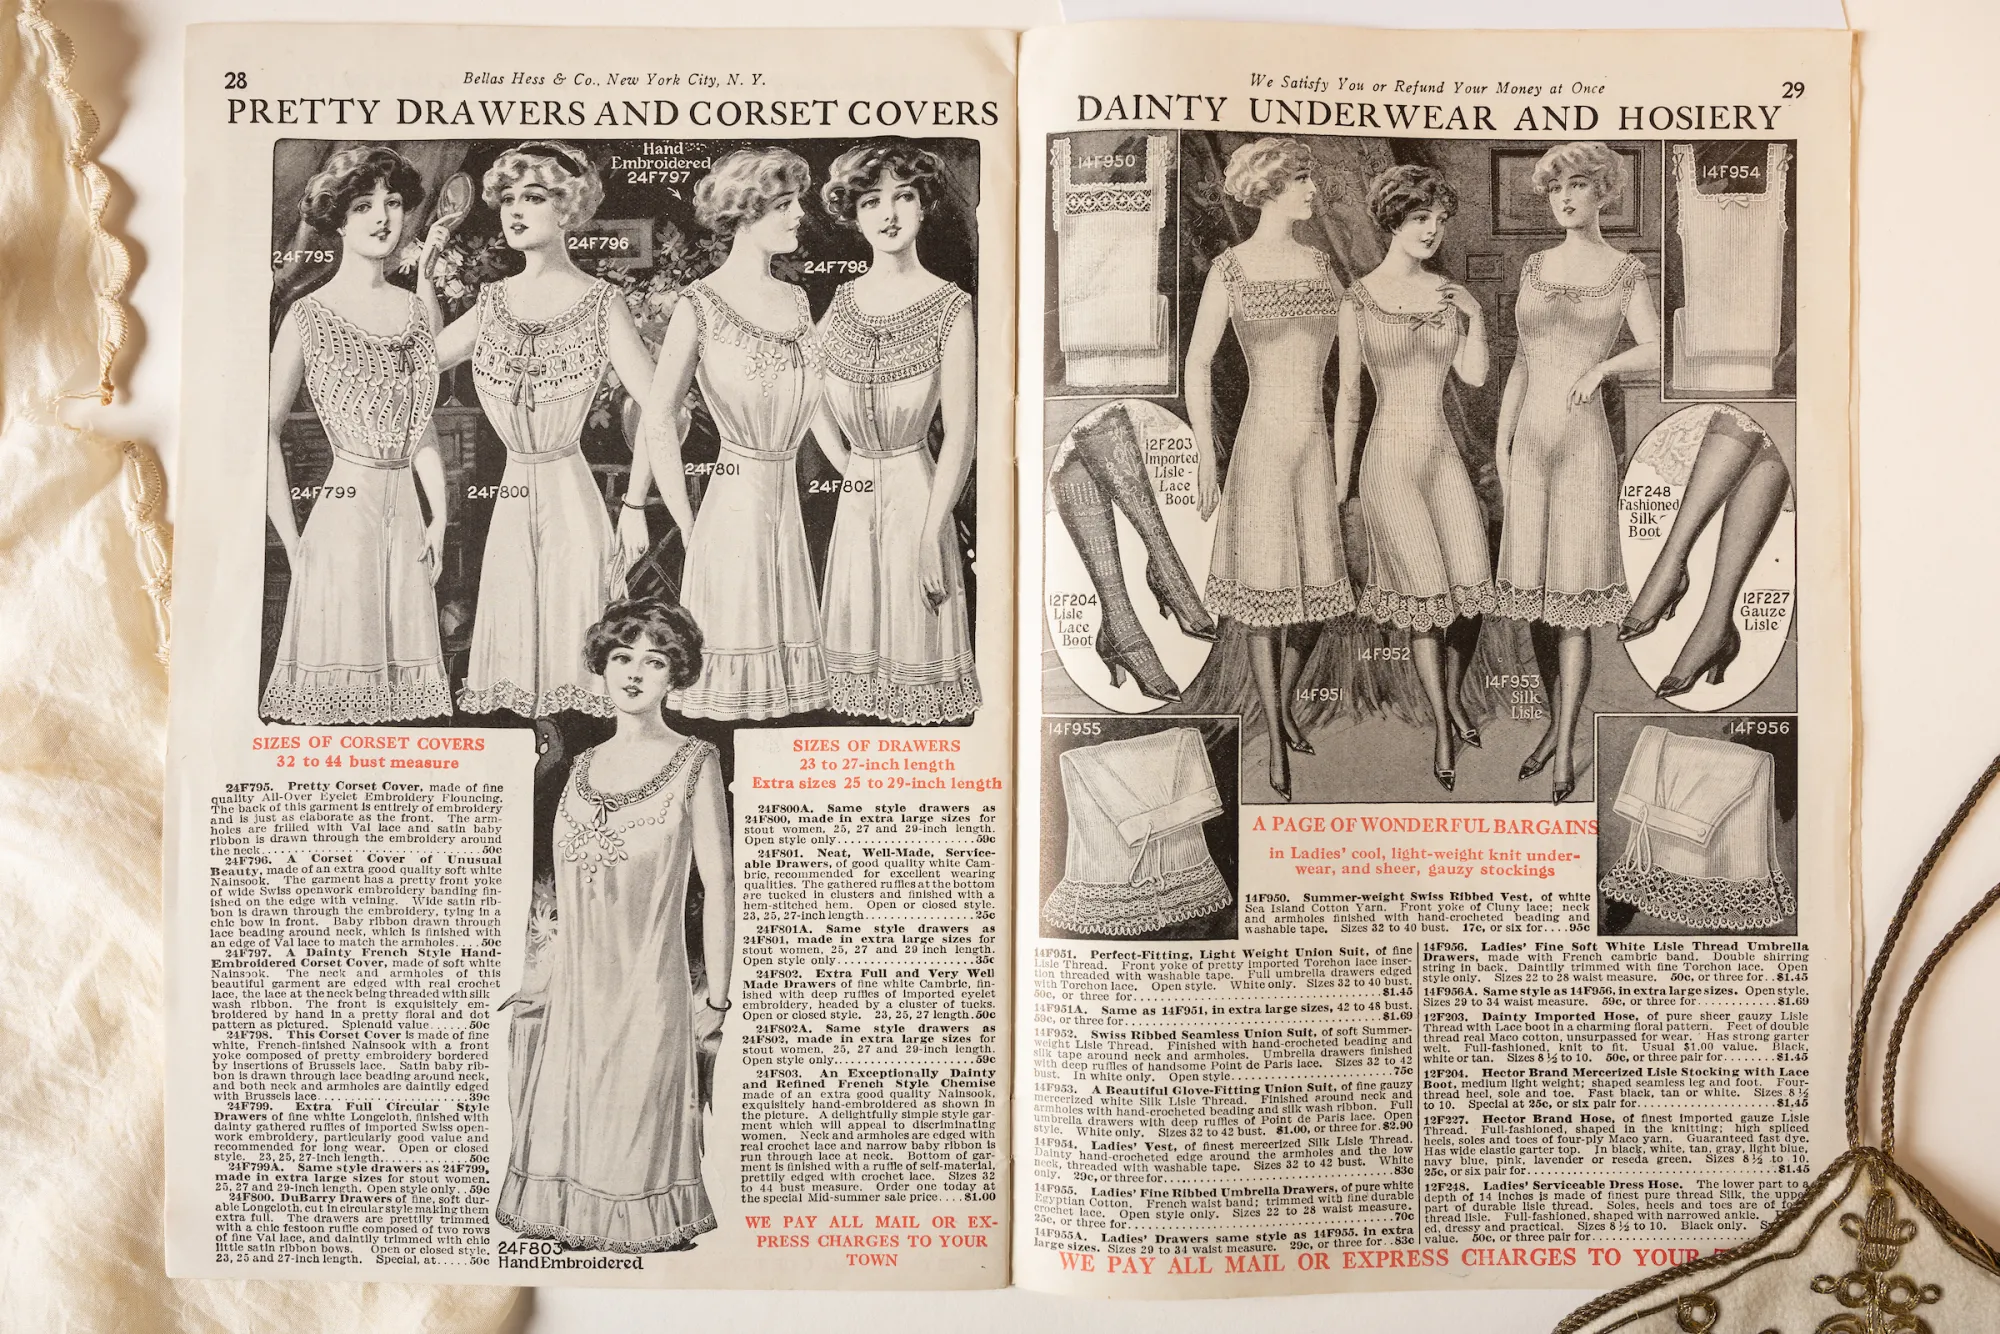 Open pages of a magazine with black and white illustrations of women modelling drawers, corset covers, underwear and hosiery